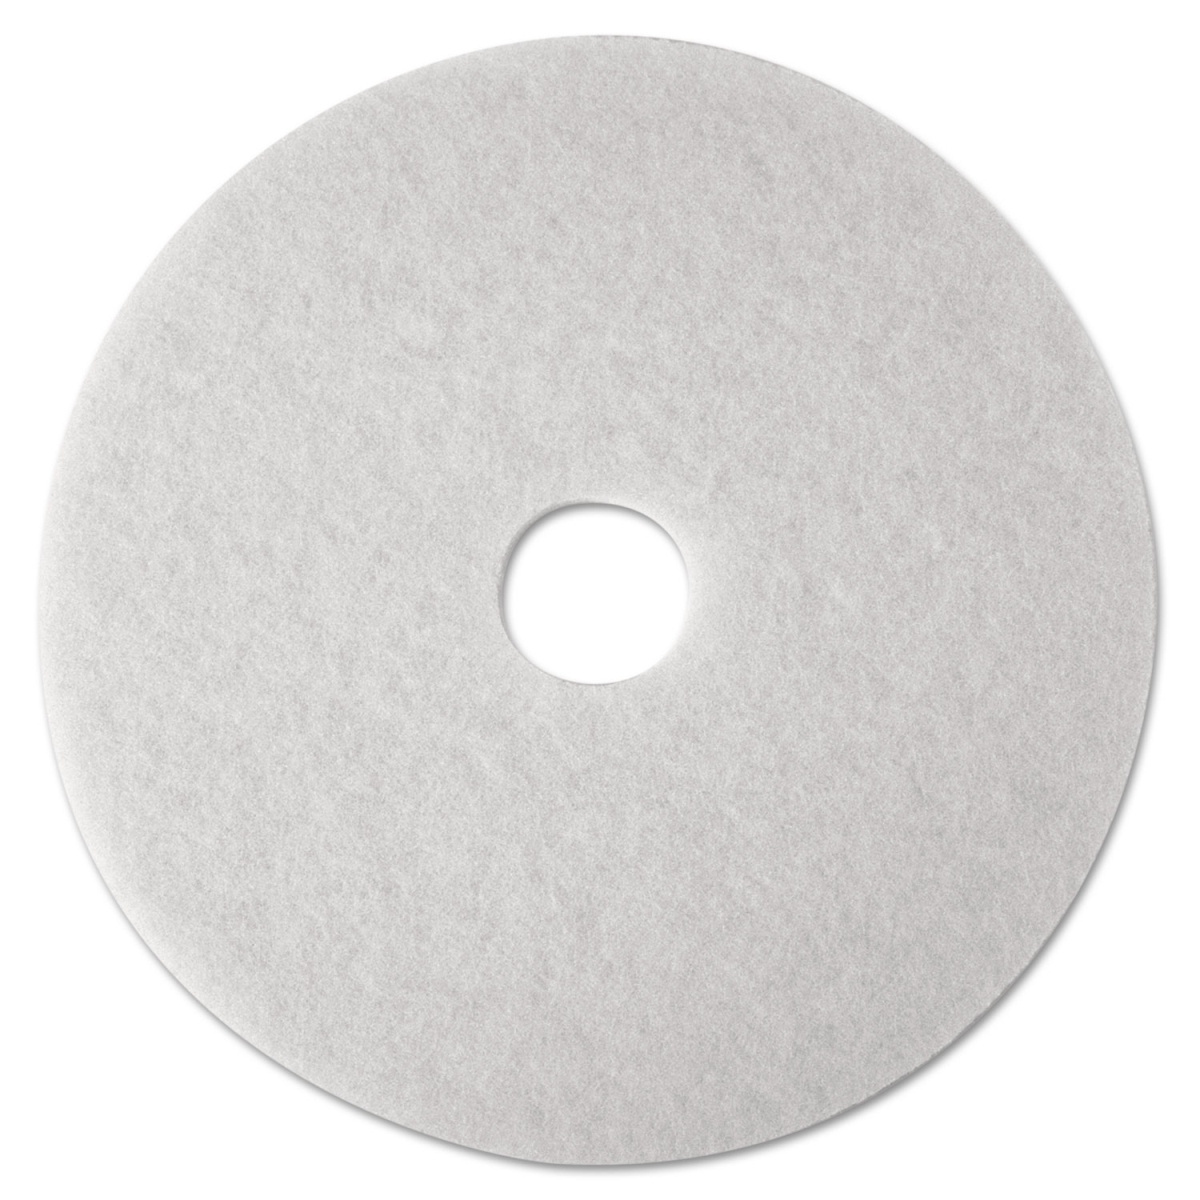 Picture of 3M 08478 14 in. Floor Pad Polish - White